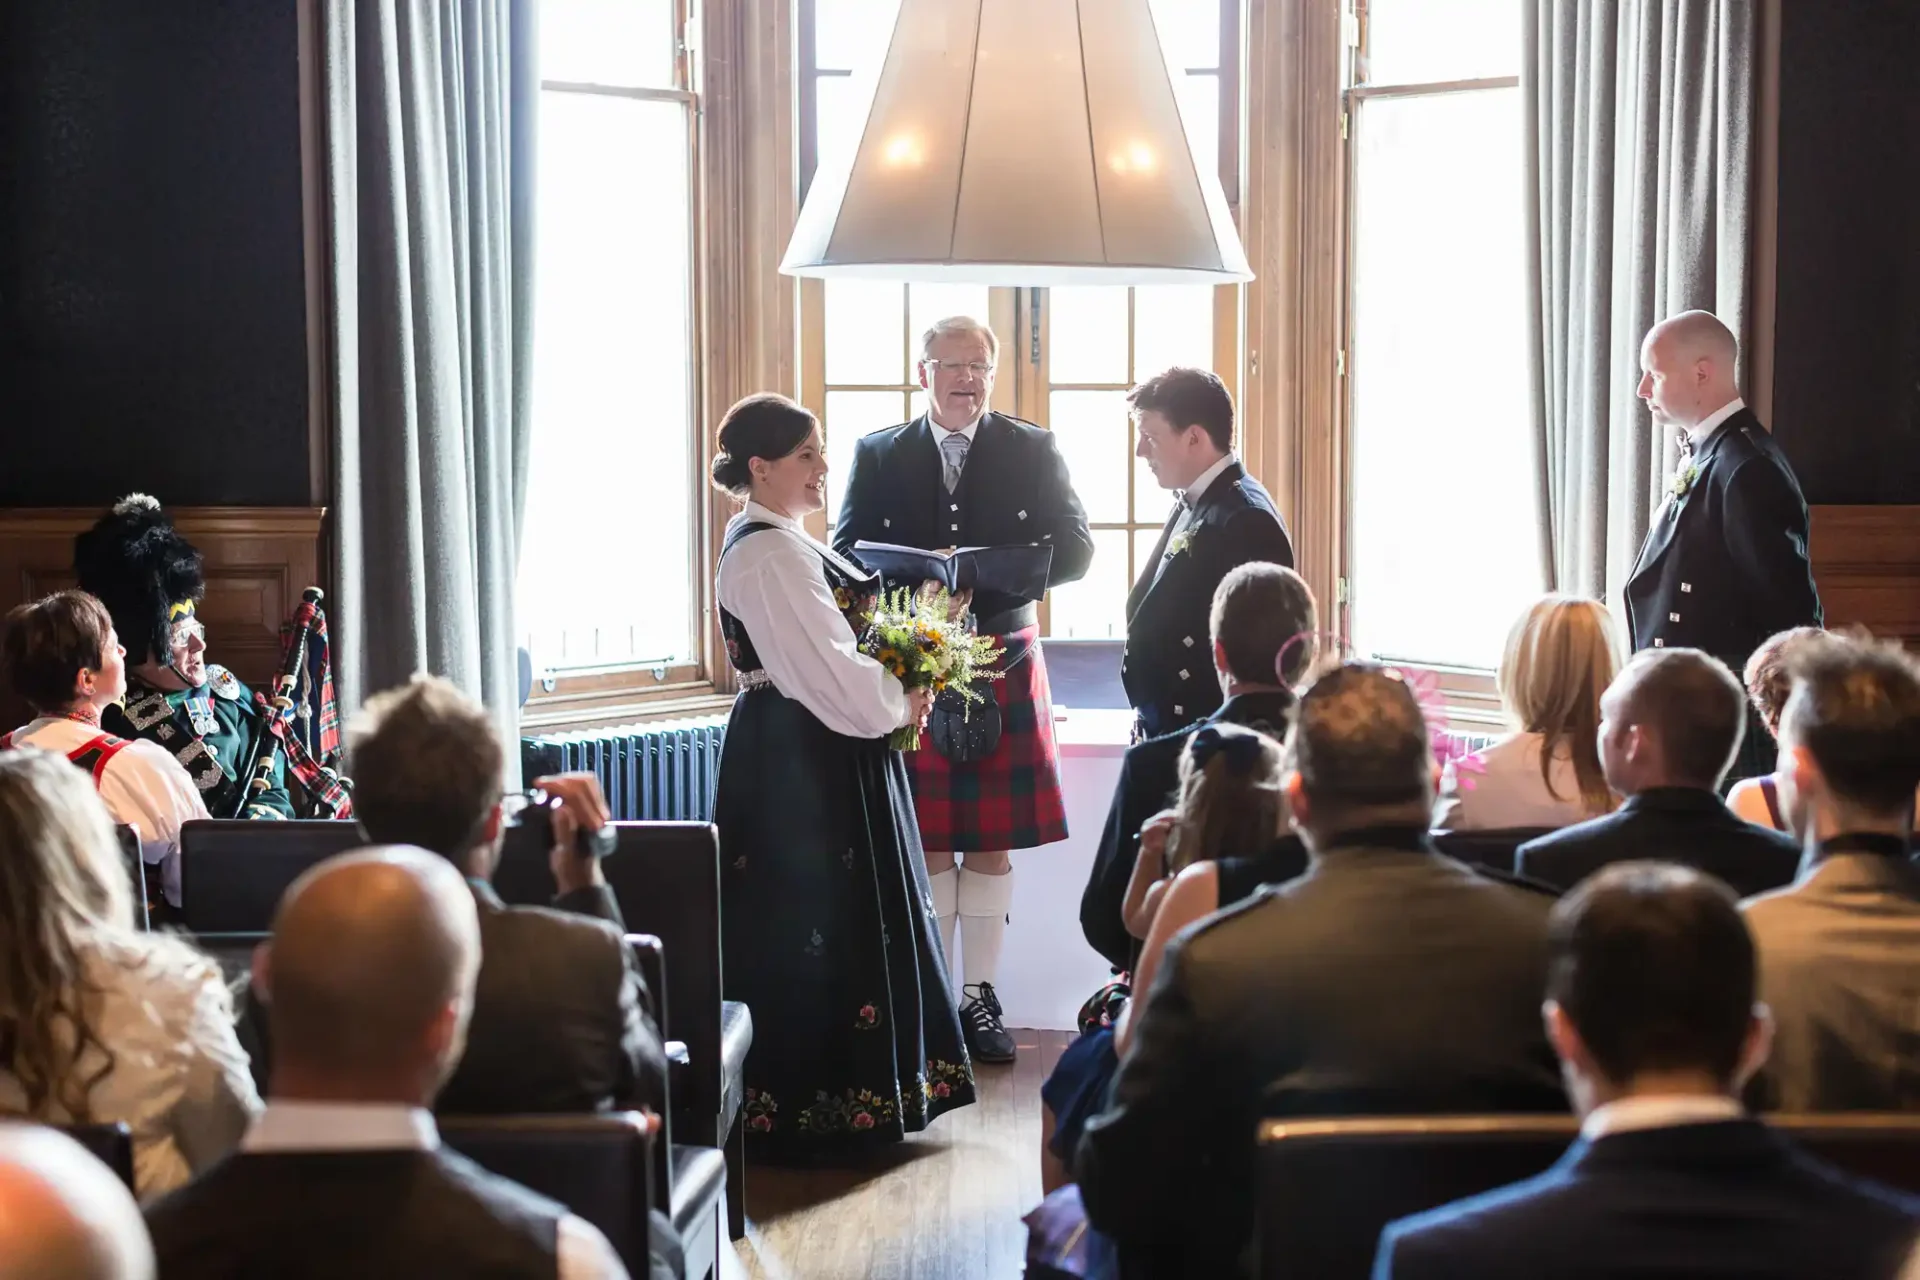 A wedding ceremony in a well-lit room featuring a bride and groom, the groom in a tartan kilt, with a bagpiper and seated guests watching.